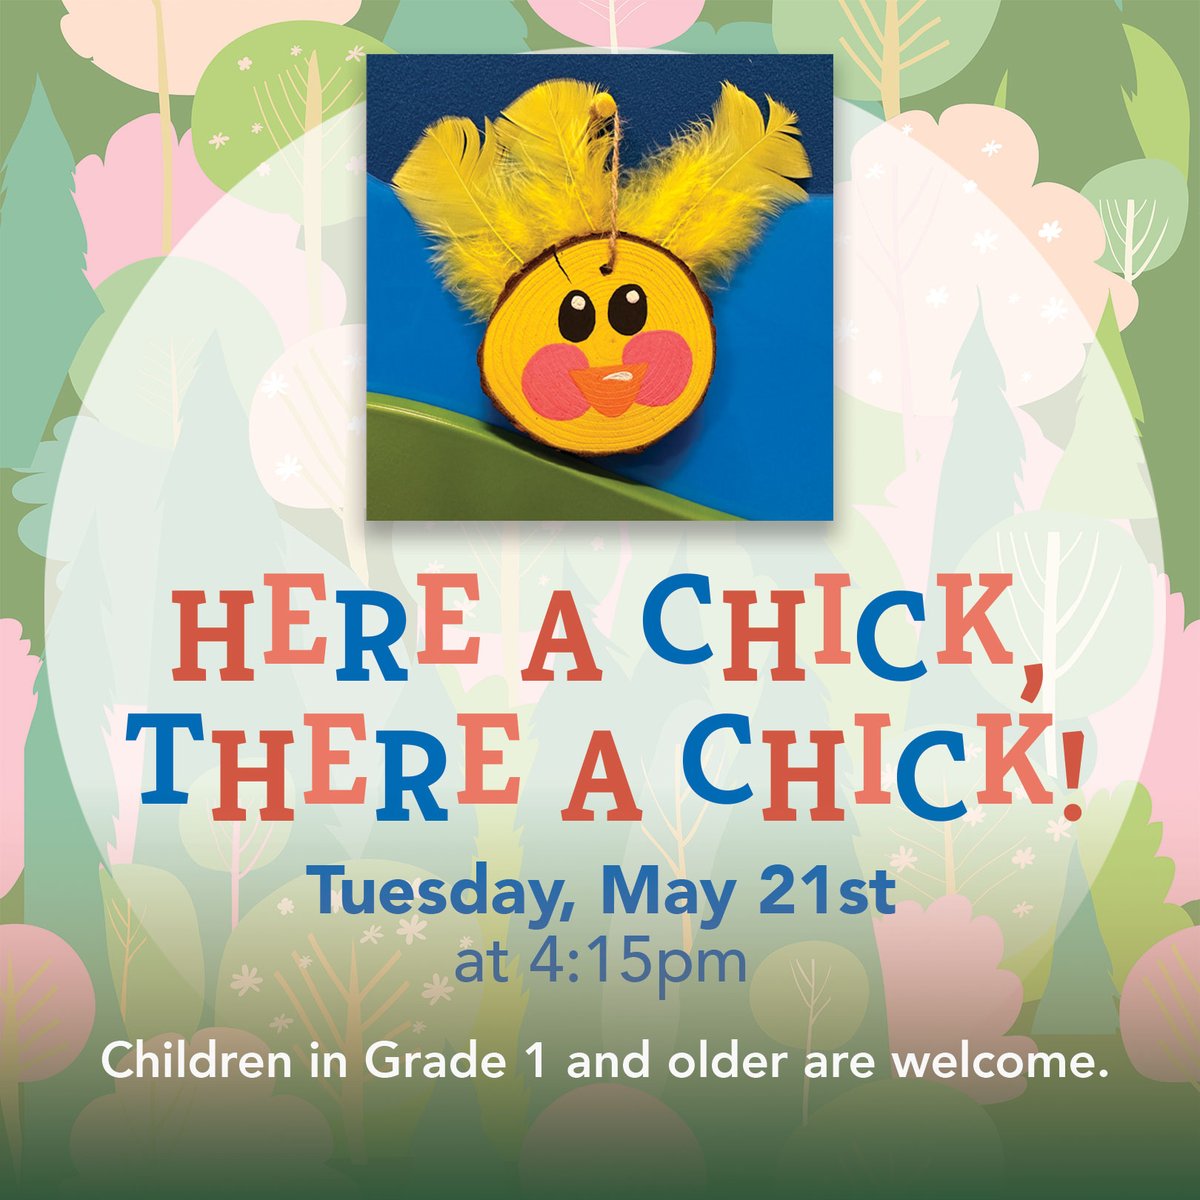 Registration is required. Space is limited to the ﬁrst 15 participants.

Visit our website to register.

#hereachickthereachick #chickens #hatching #spring #hhﬂ  #librariesrock